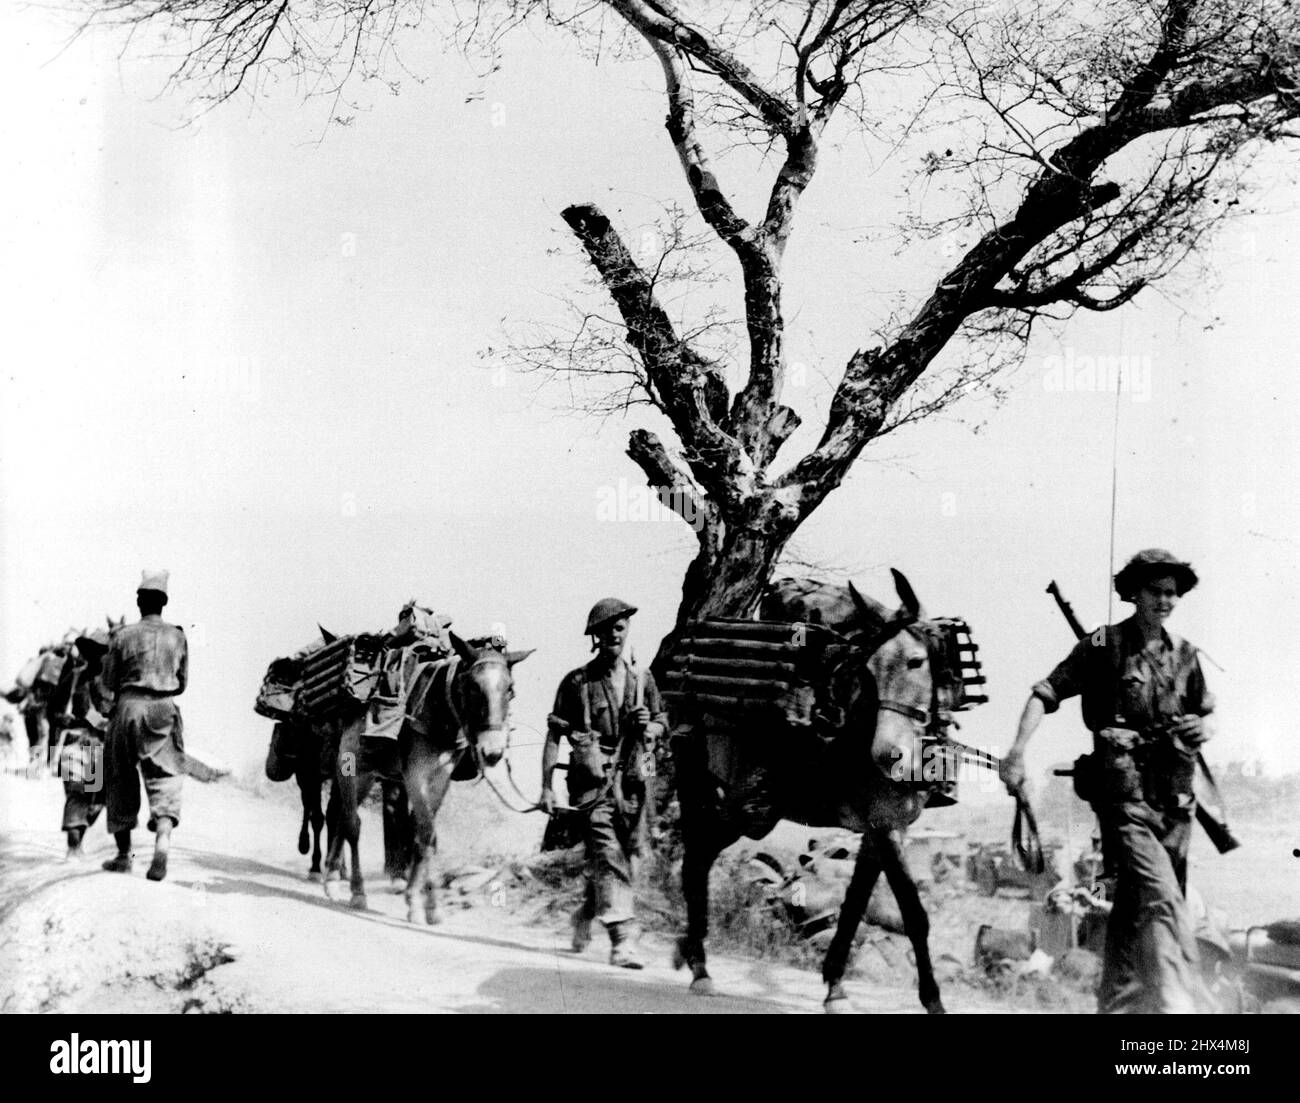 Troops are streaming forward along every passable track by every means of available locomotion.... Japanese intend to hold Mandalay to the last. Still clinging desperately to part of historic Mandalay, Burma's second city and one time capital are Jap. remnants whose imminent defeat will be the culmination of a great strategic plan, the ending of the first half: The Jungle and Railway Corridor half of the liberation of all Burma. March 01, 1945. (Photo by British Official Picture). Stock Photo